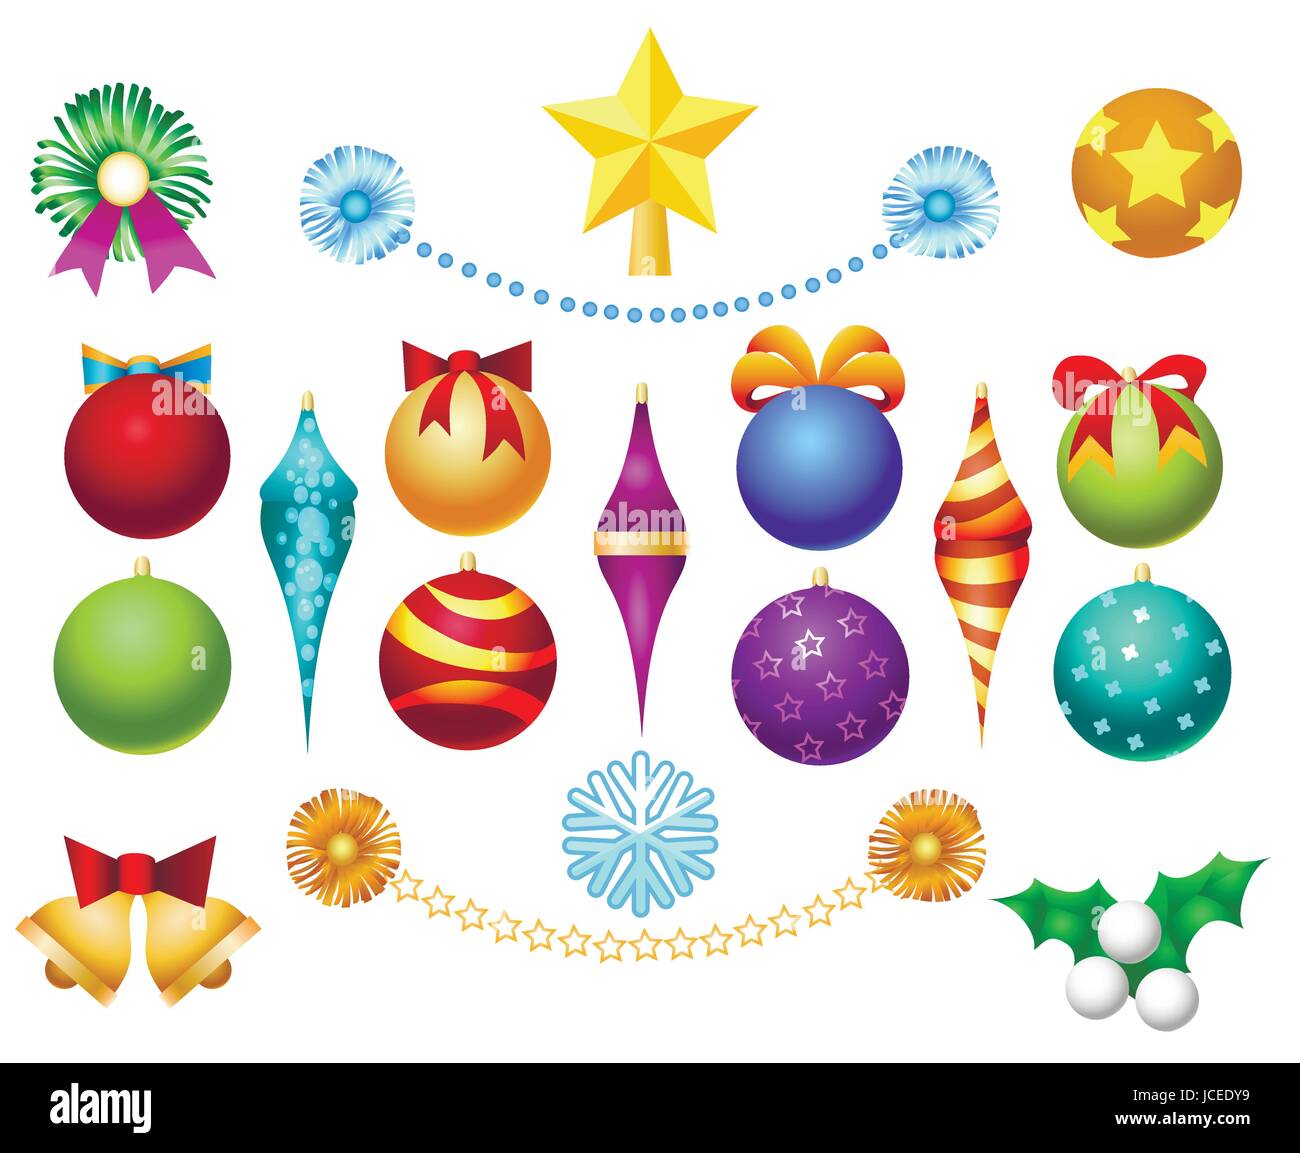 Xmas tree toys set isolated on white background. Christmas ornaments decoration balls and garlands, bells and bows vector illustration Stock Vector